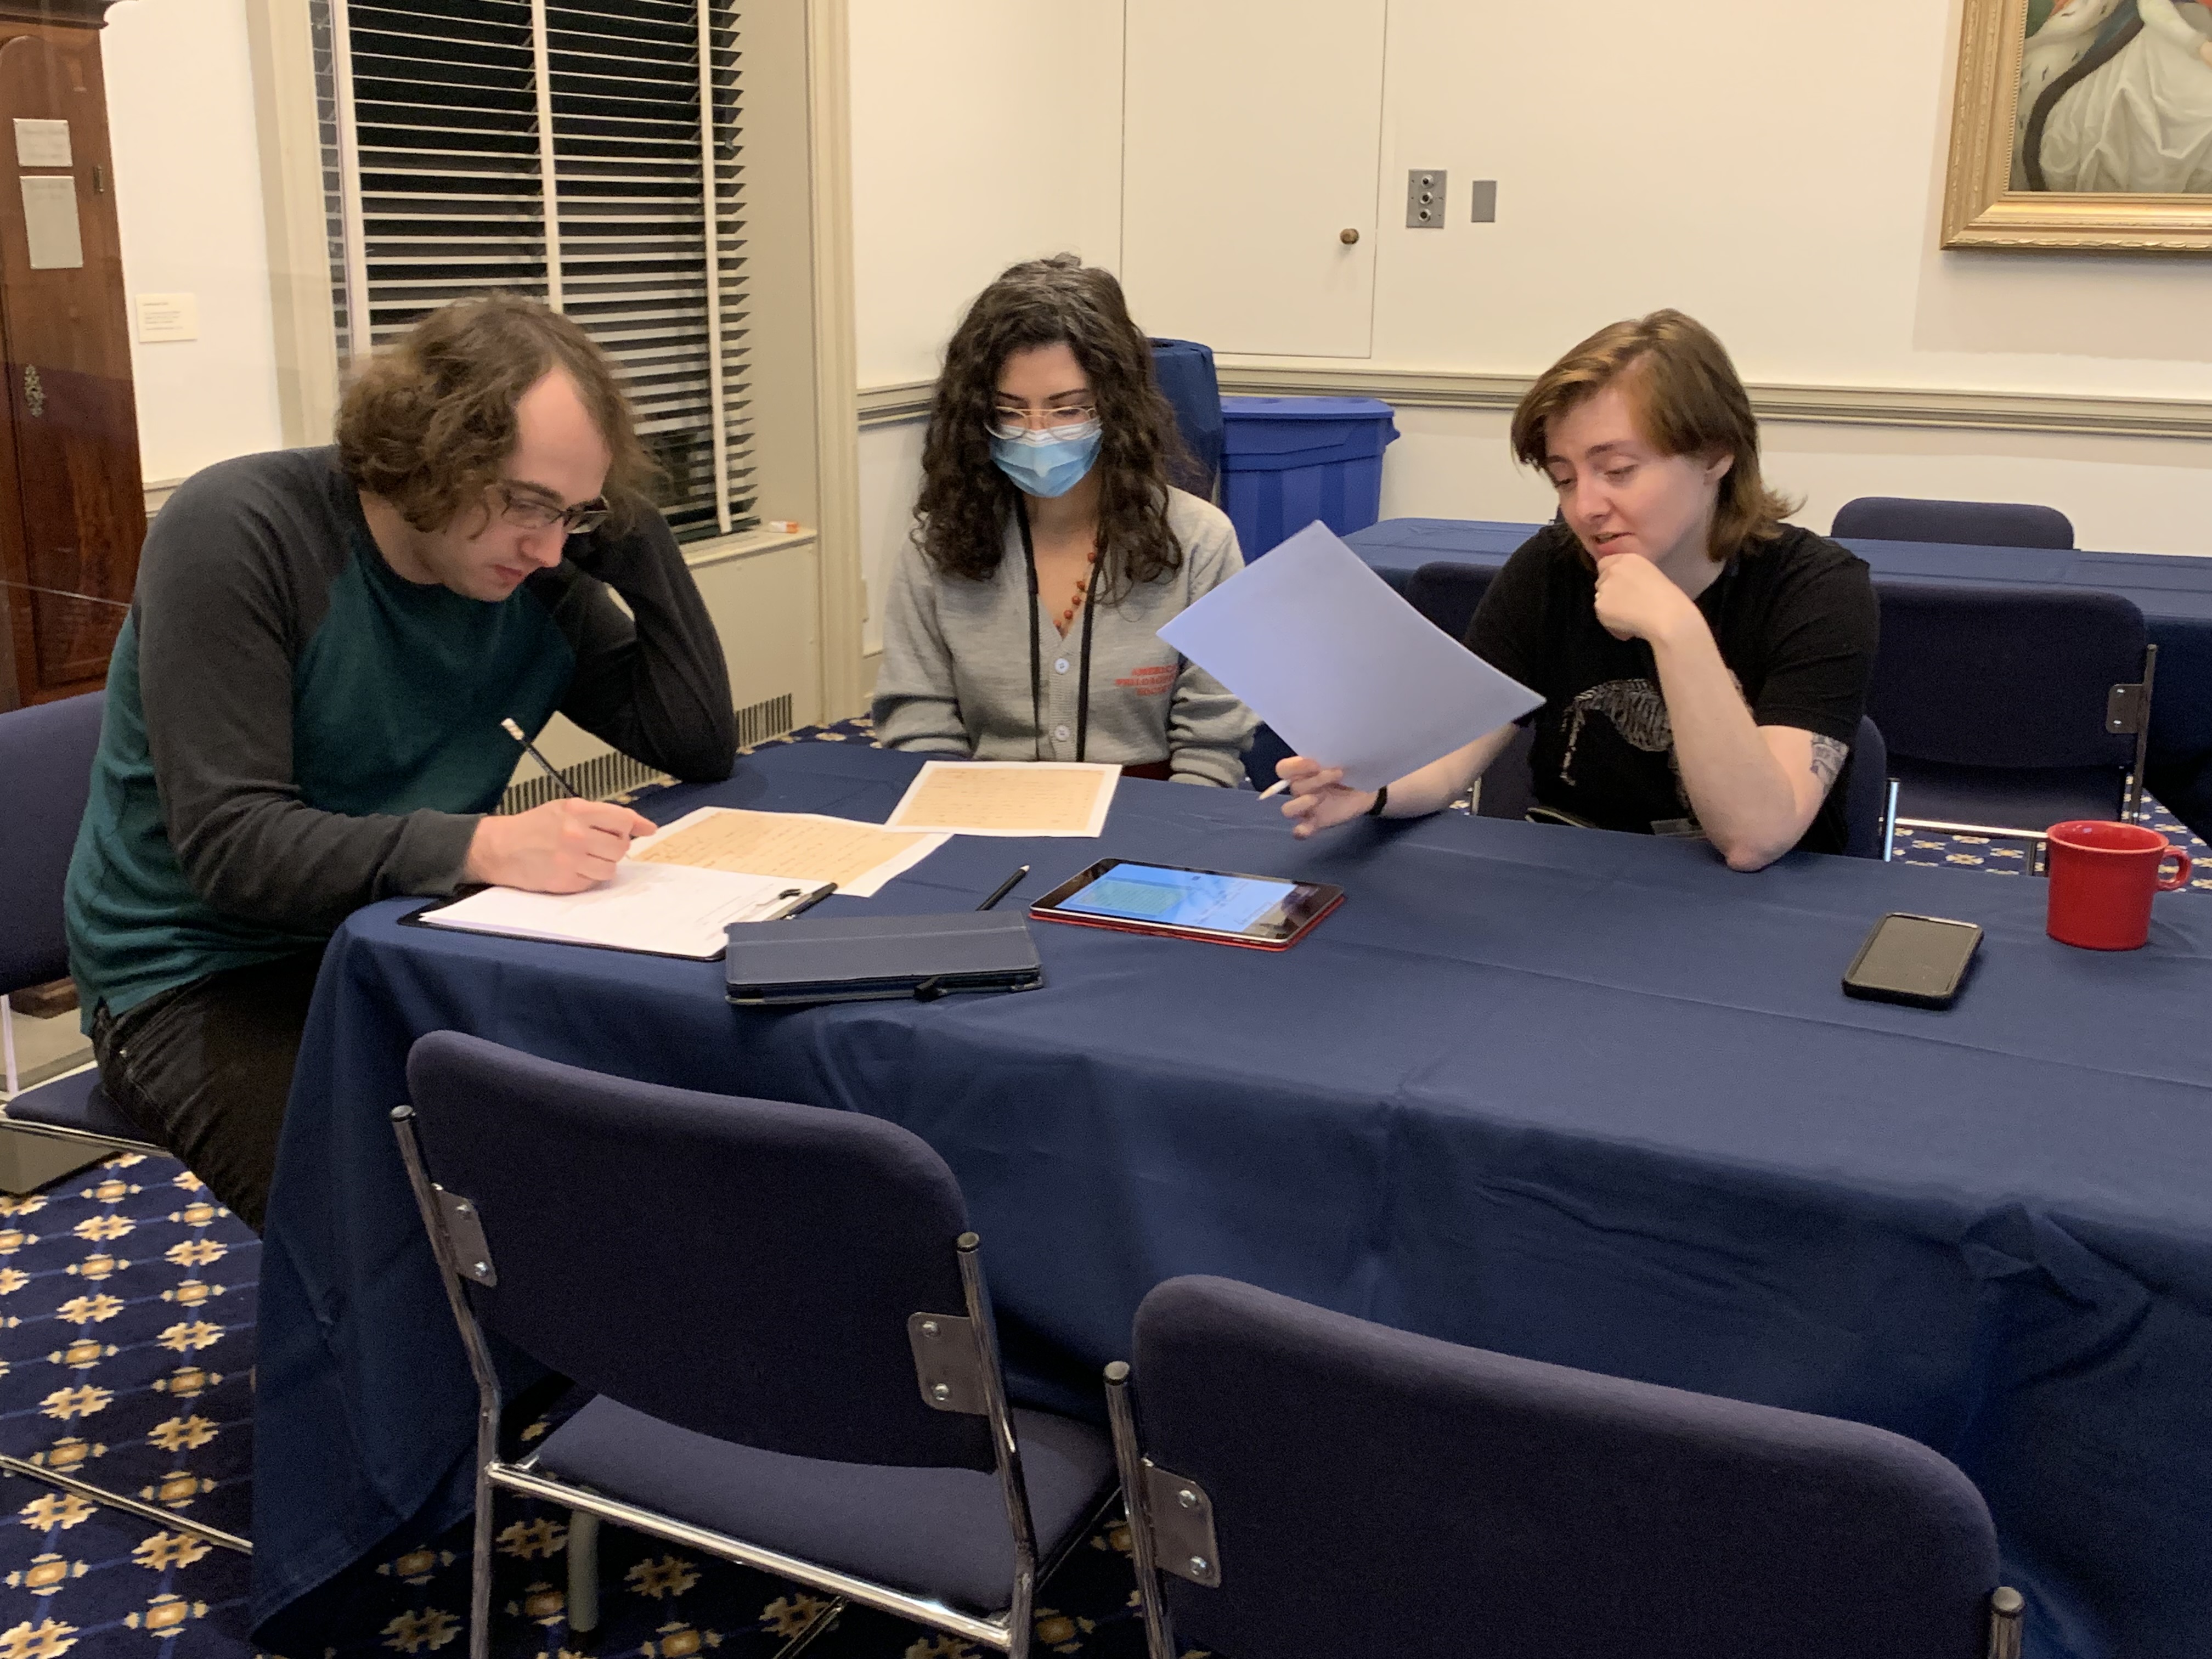 photo of three people sitting at a table working on transcription